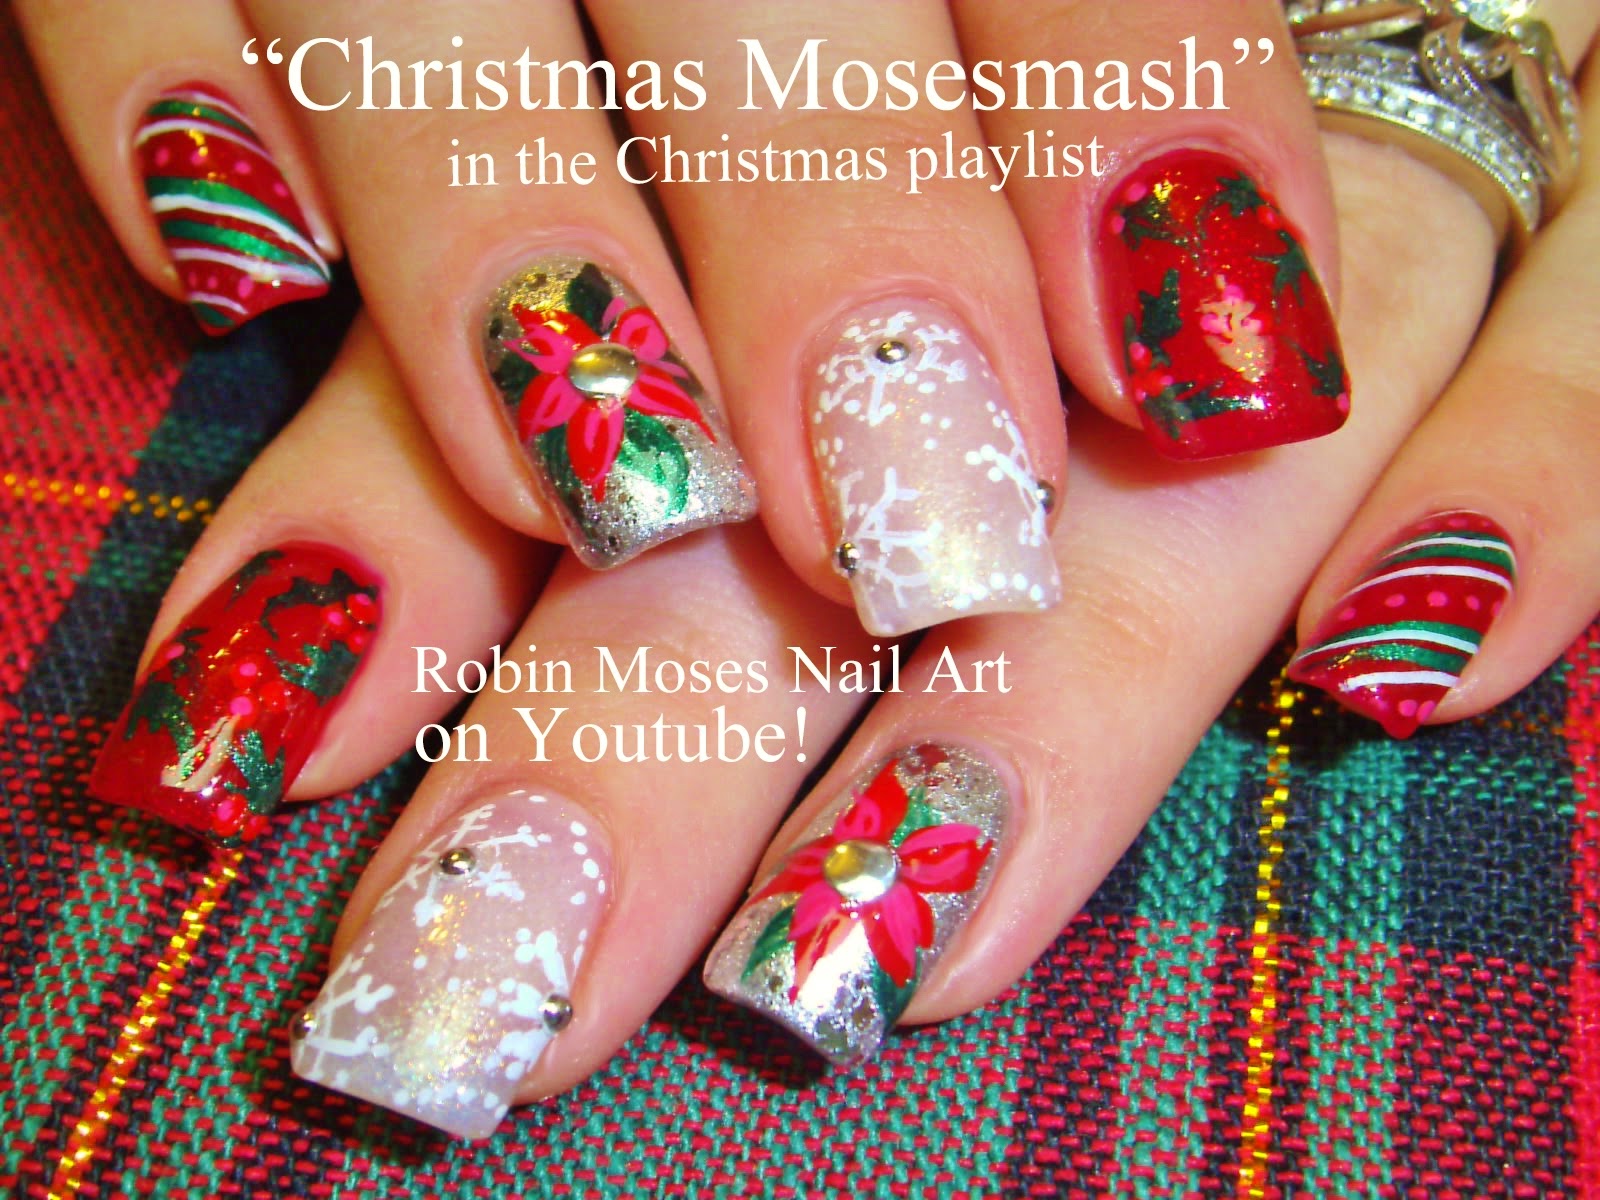 9. "Glittery Christmas Nail Designs on Pinterest" - wide 4